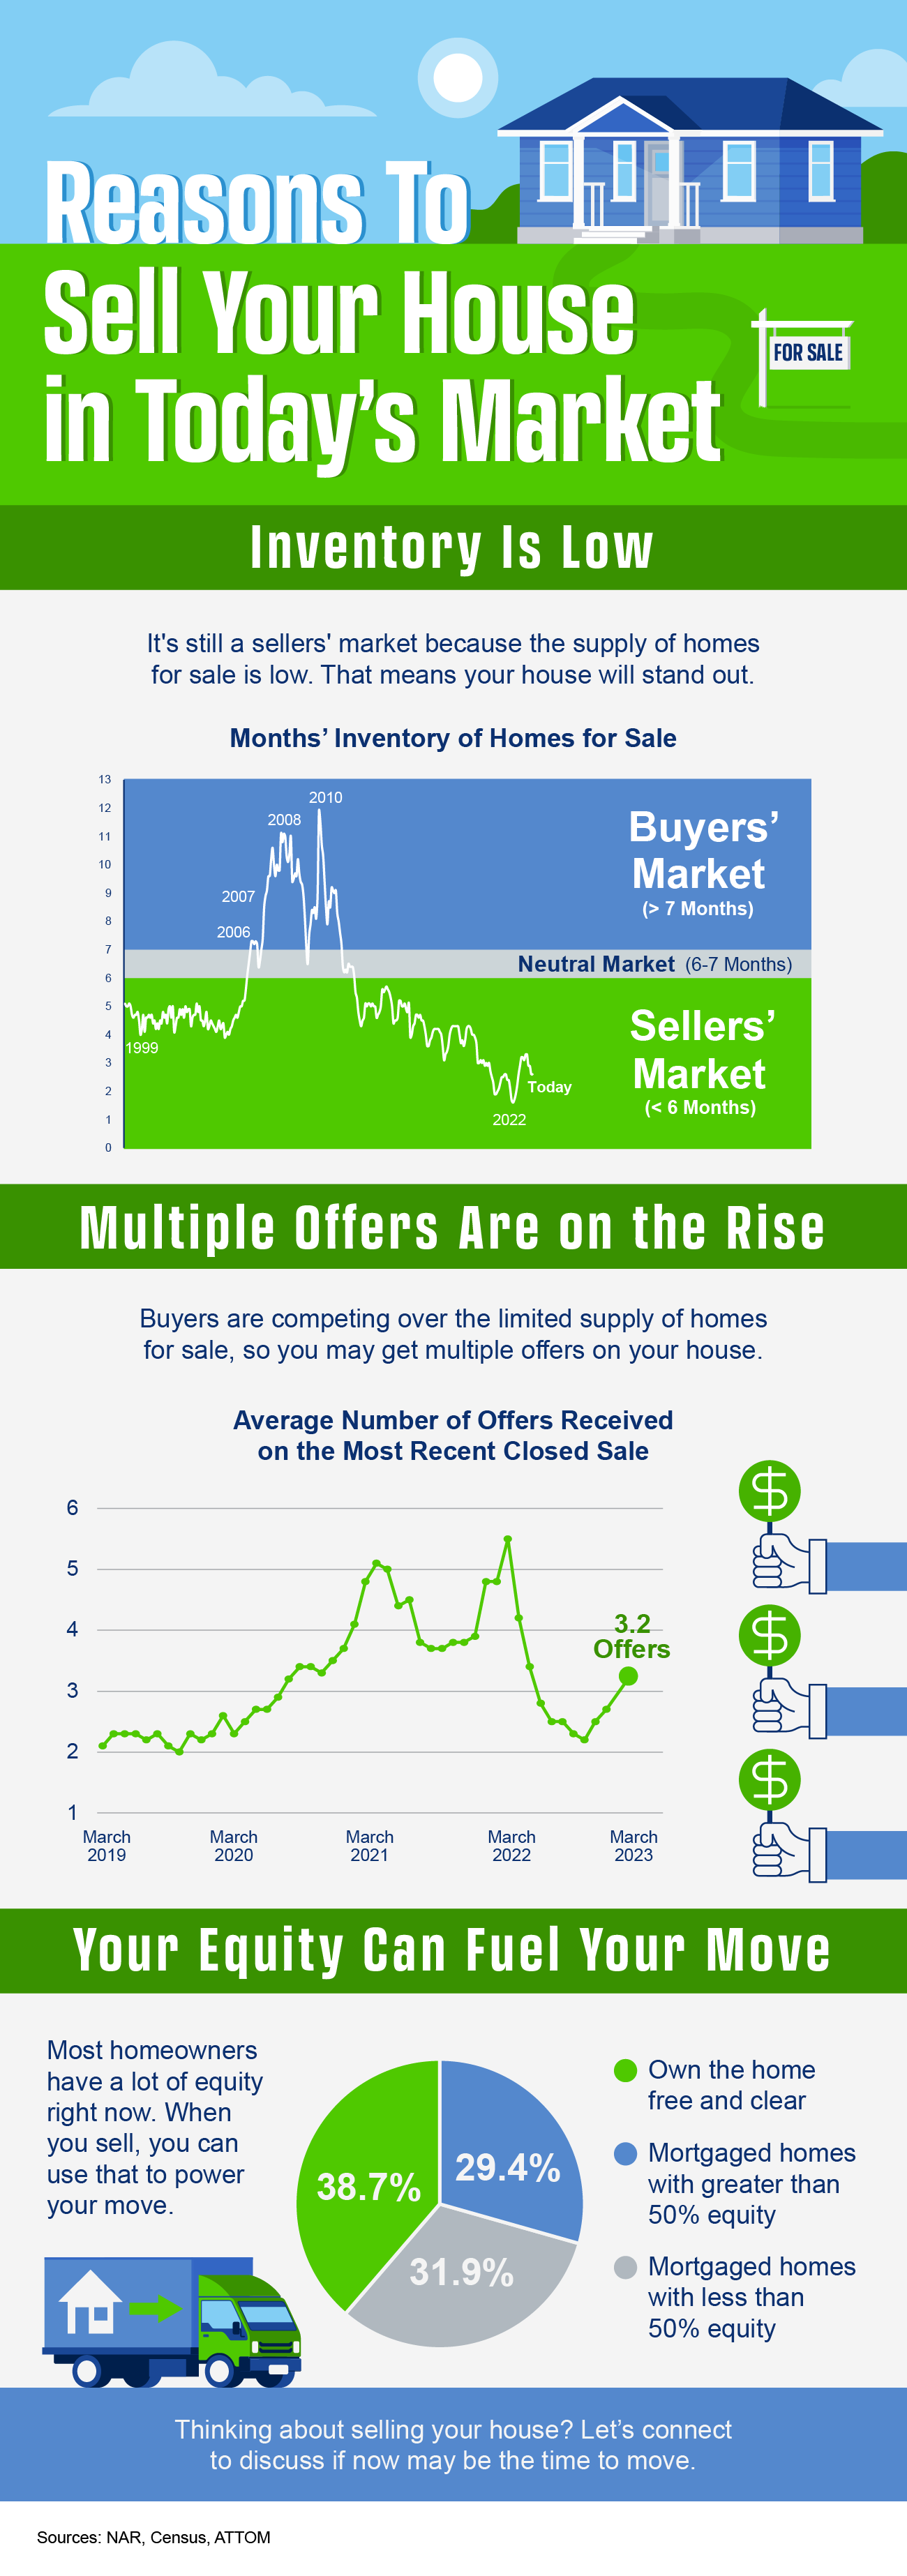  Reasons-To-Sell-Your-House-in-Todays-Market-MEM1 Reasons To Sell Your House Today [INFOGRAPHIC]  